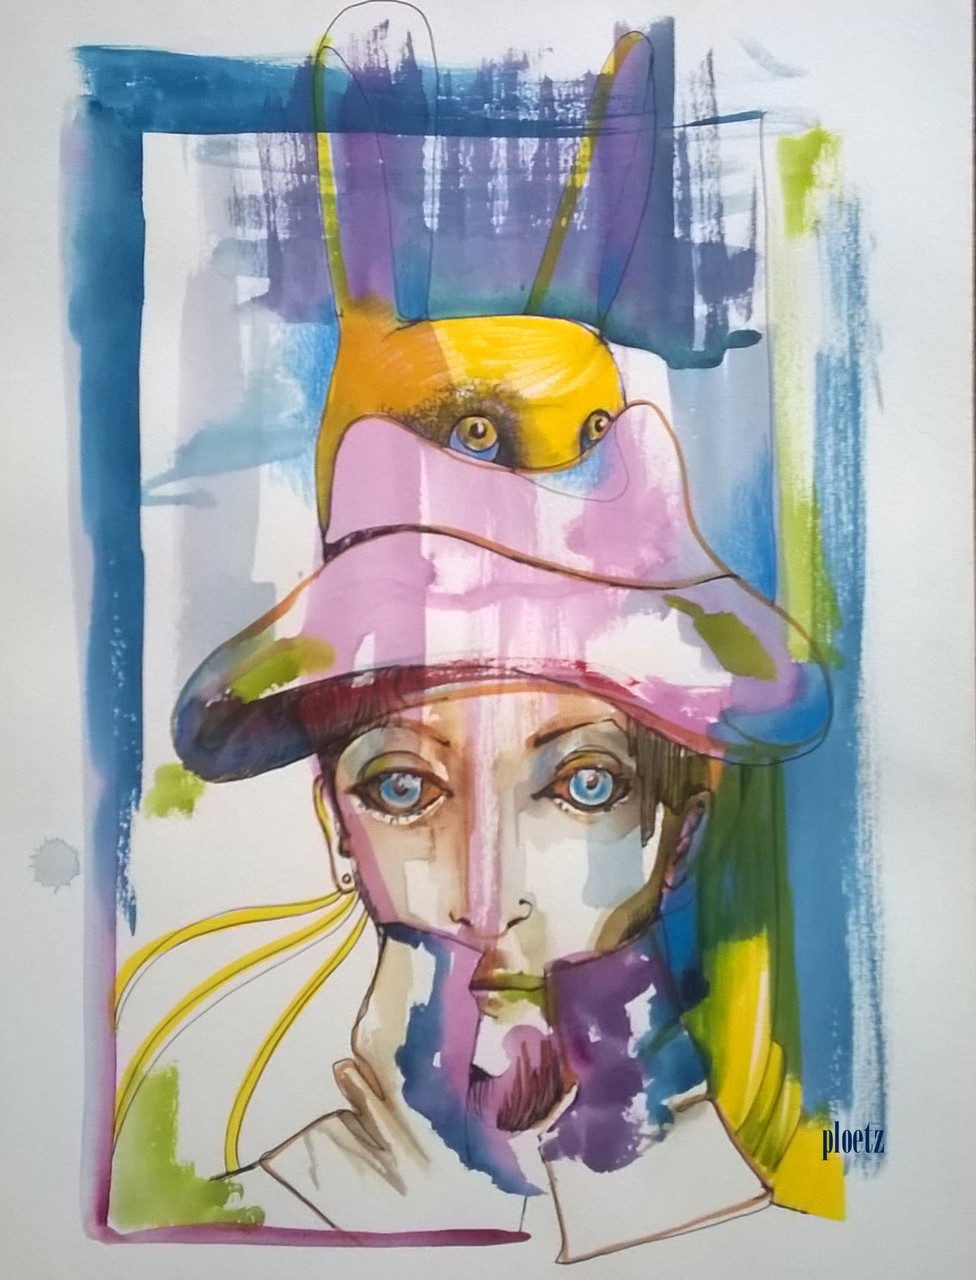 "Mad Hatter", 30 x 40 cm, mixed on paper, 2015